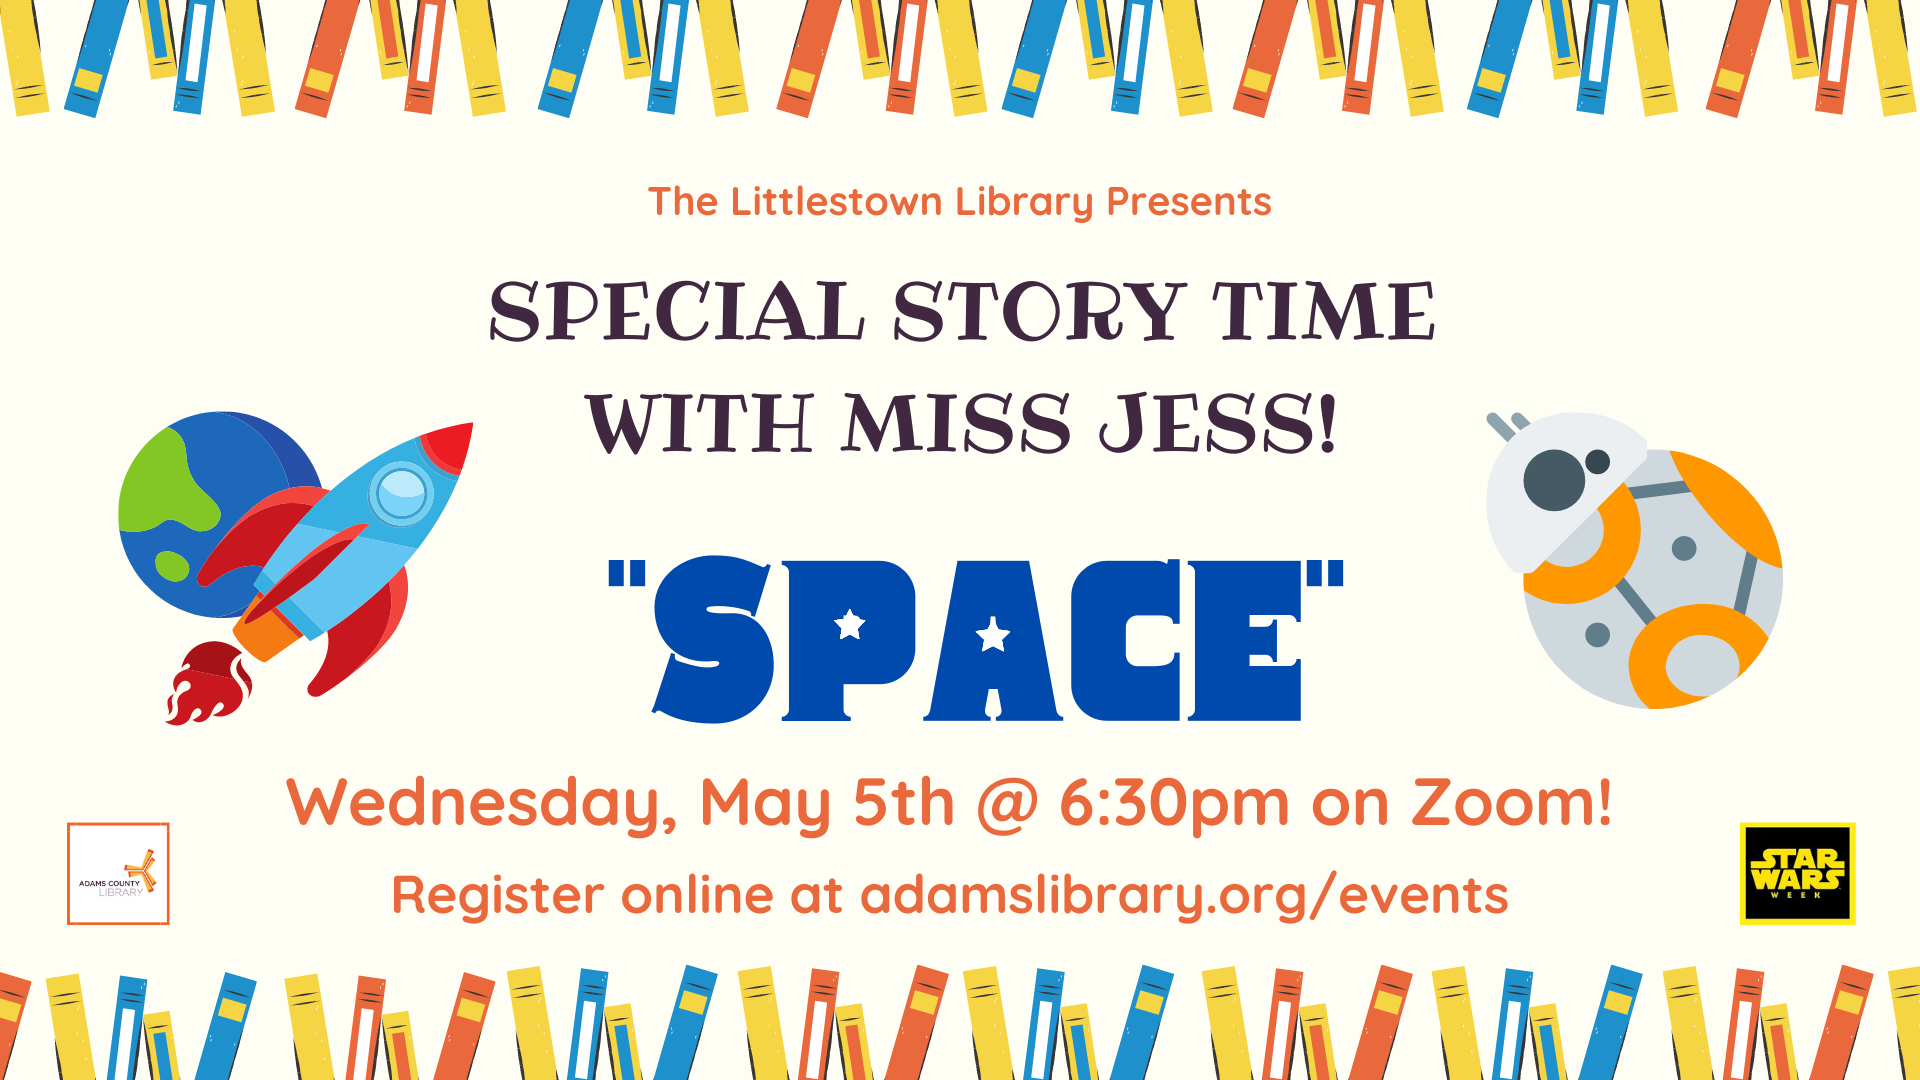 Special Story Time with Miss Jess about Space. Join us Wednesday, May 5th at 6:30pm on Zoom. Register online at adamslibrary.org/events